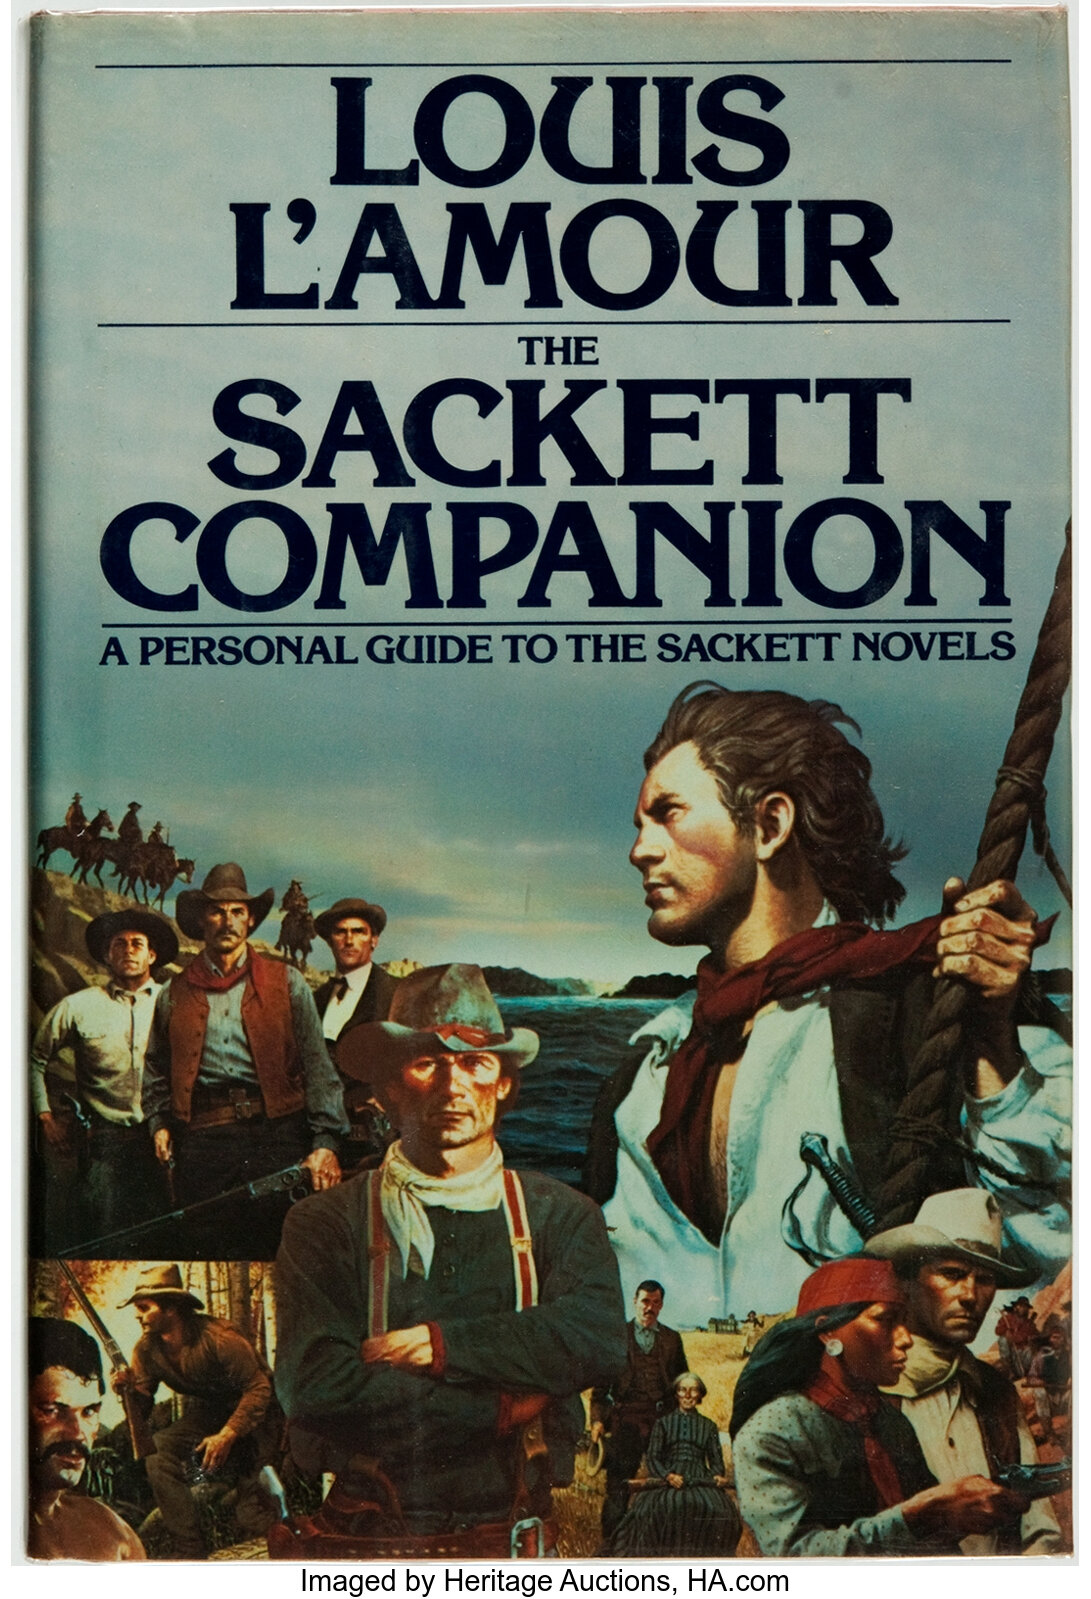 THE SACKETT COMPANION : A Personal Guide to the Sackett Novels by